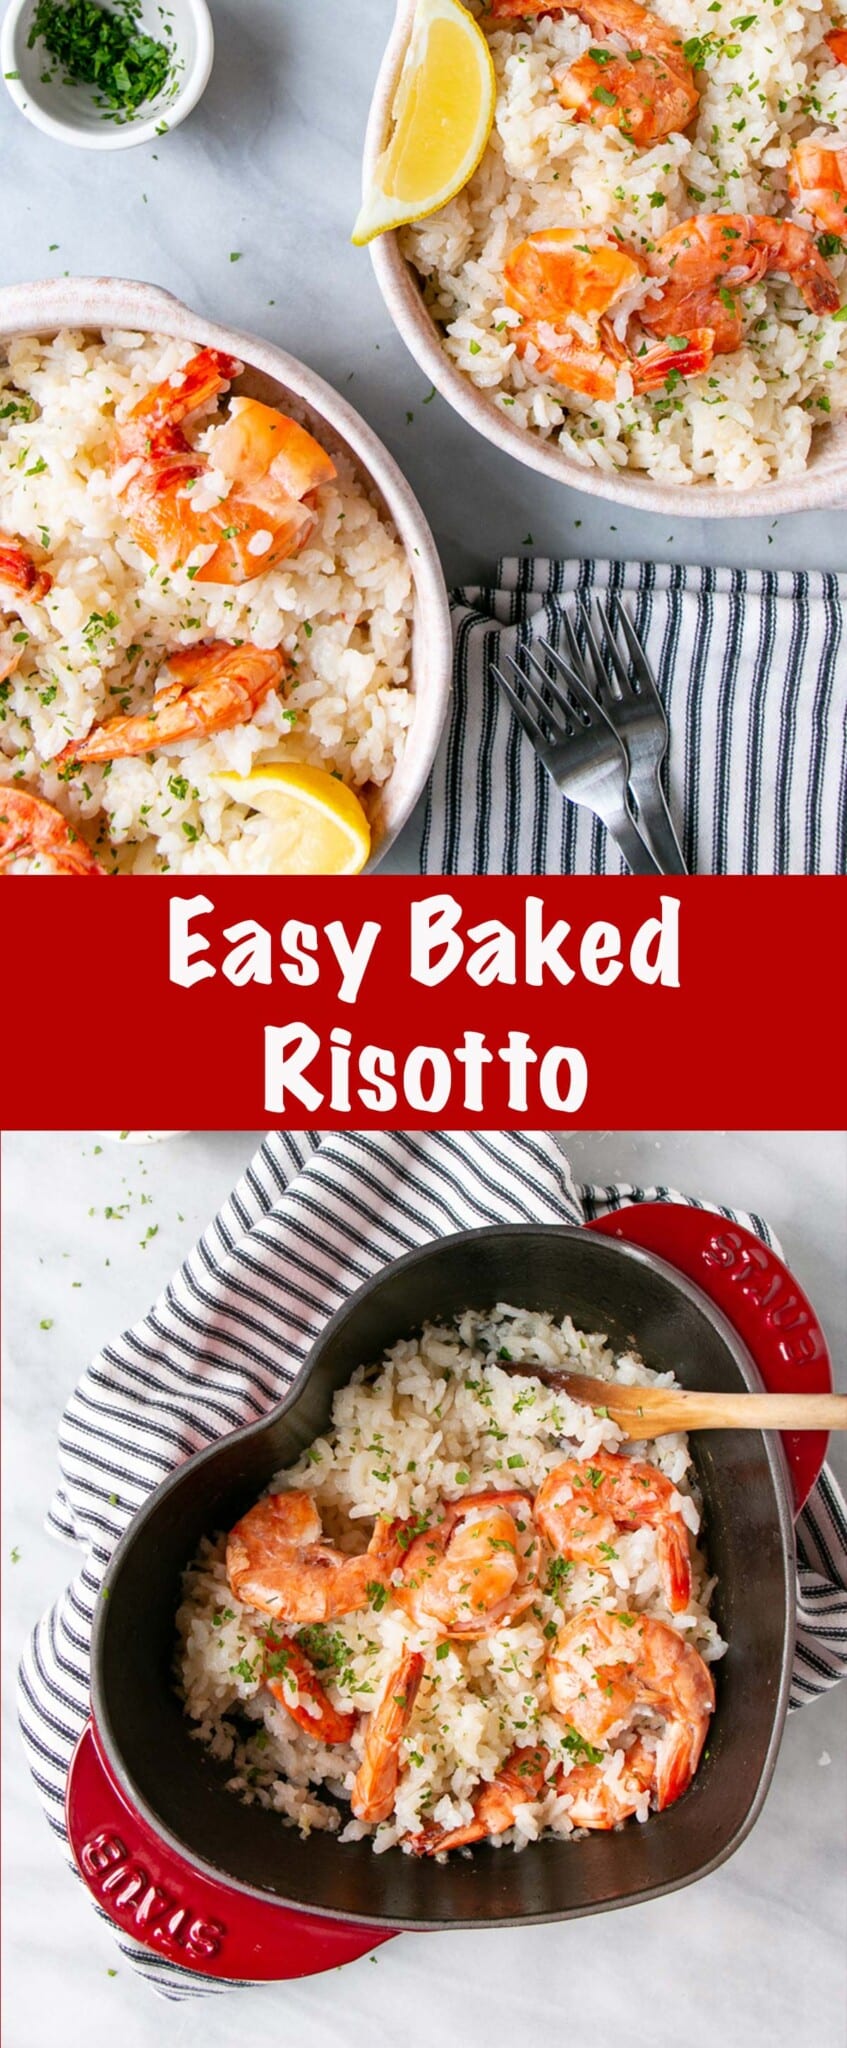 Make Date Night (OR Valentine's Day!!), special, delicious, and relaxed with this Date Night Oven Baked Garlic Butter Prawn Risotto.  via @mykitchenlove